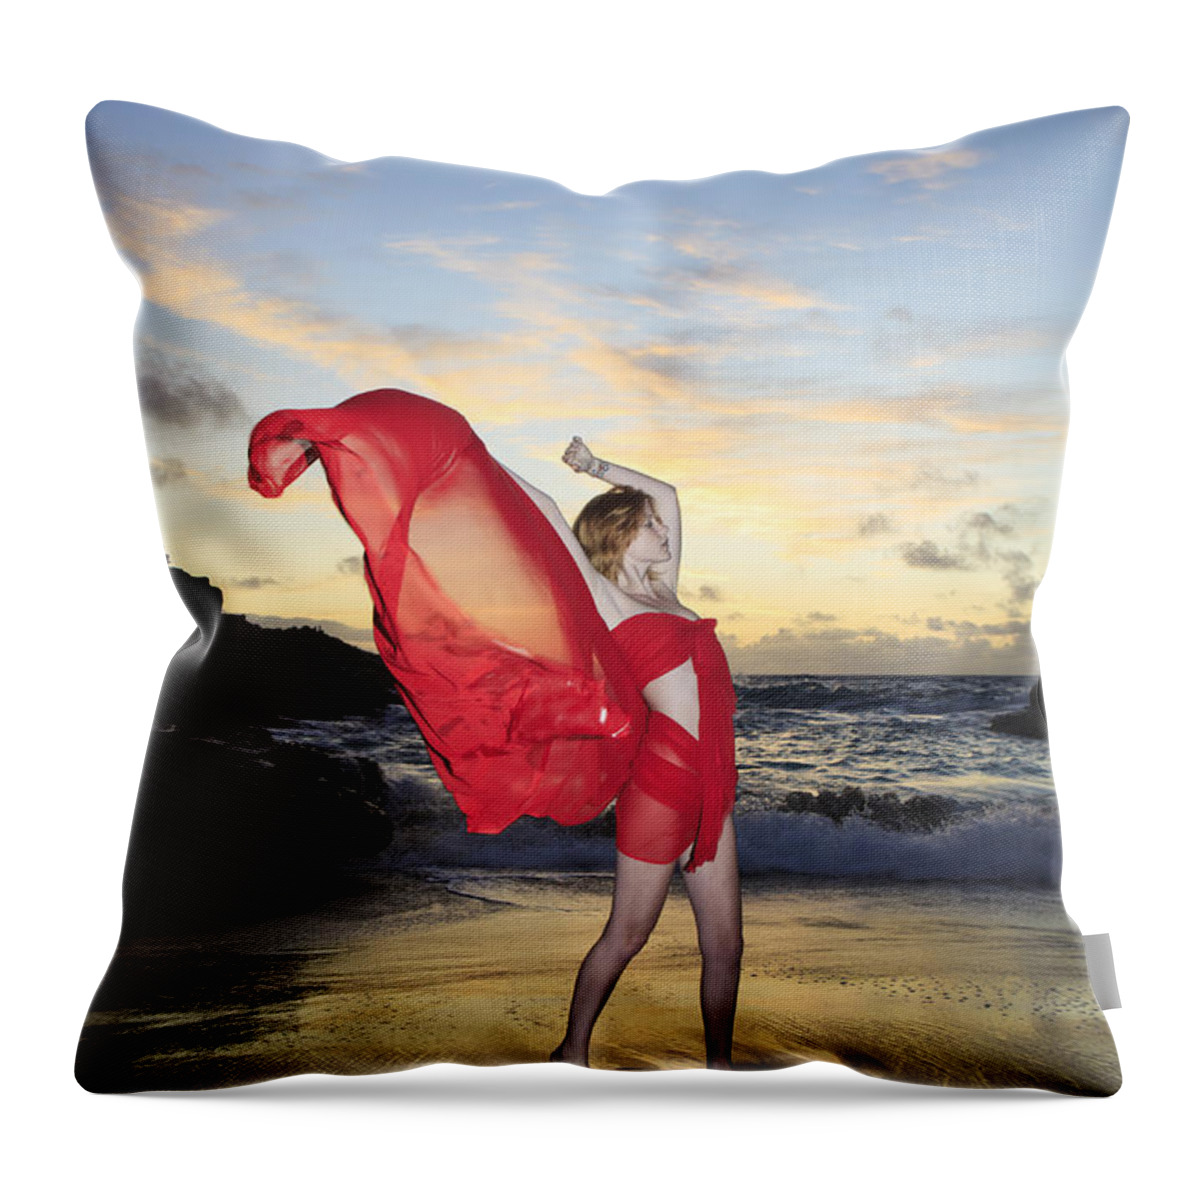 Beach Throw Pillow featuring the photograph Flowing Fabric by Tomas del Amo - Printscapes